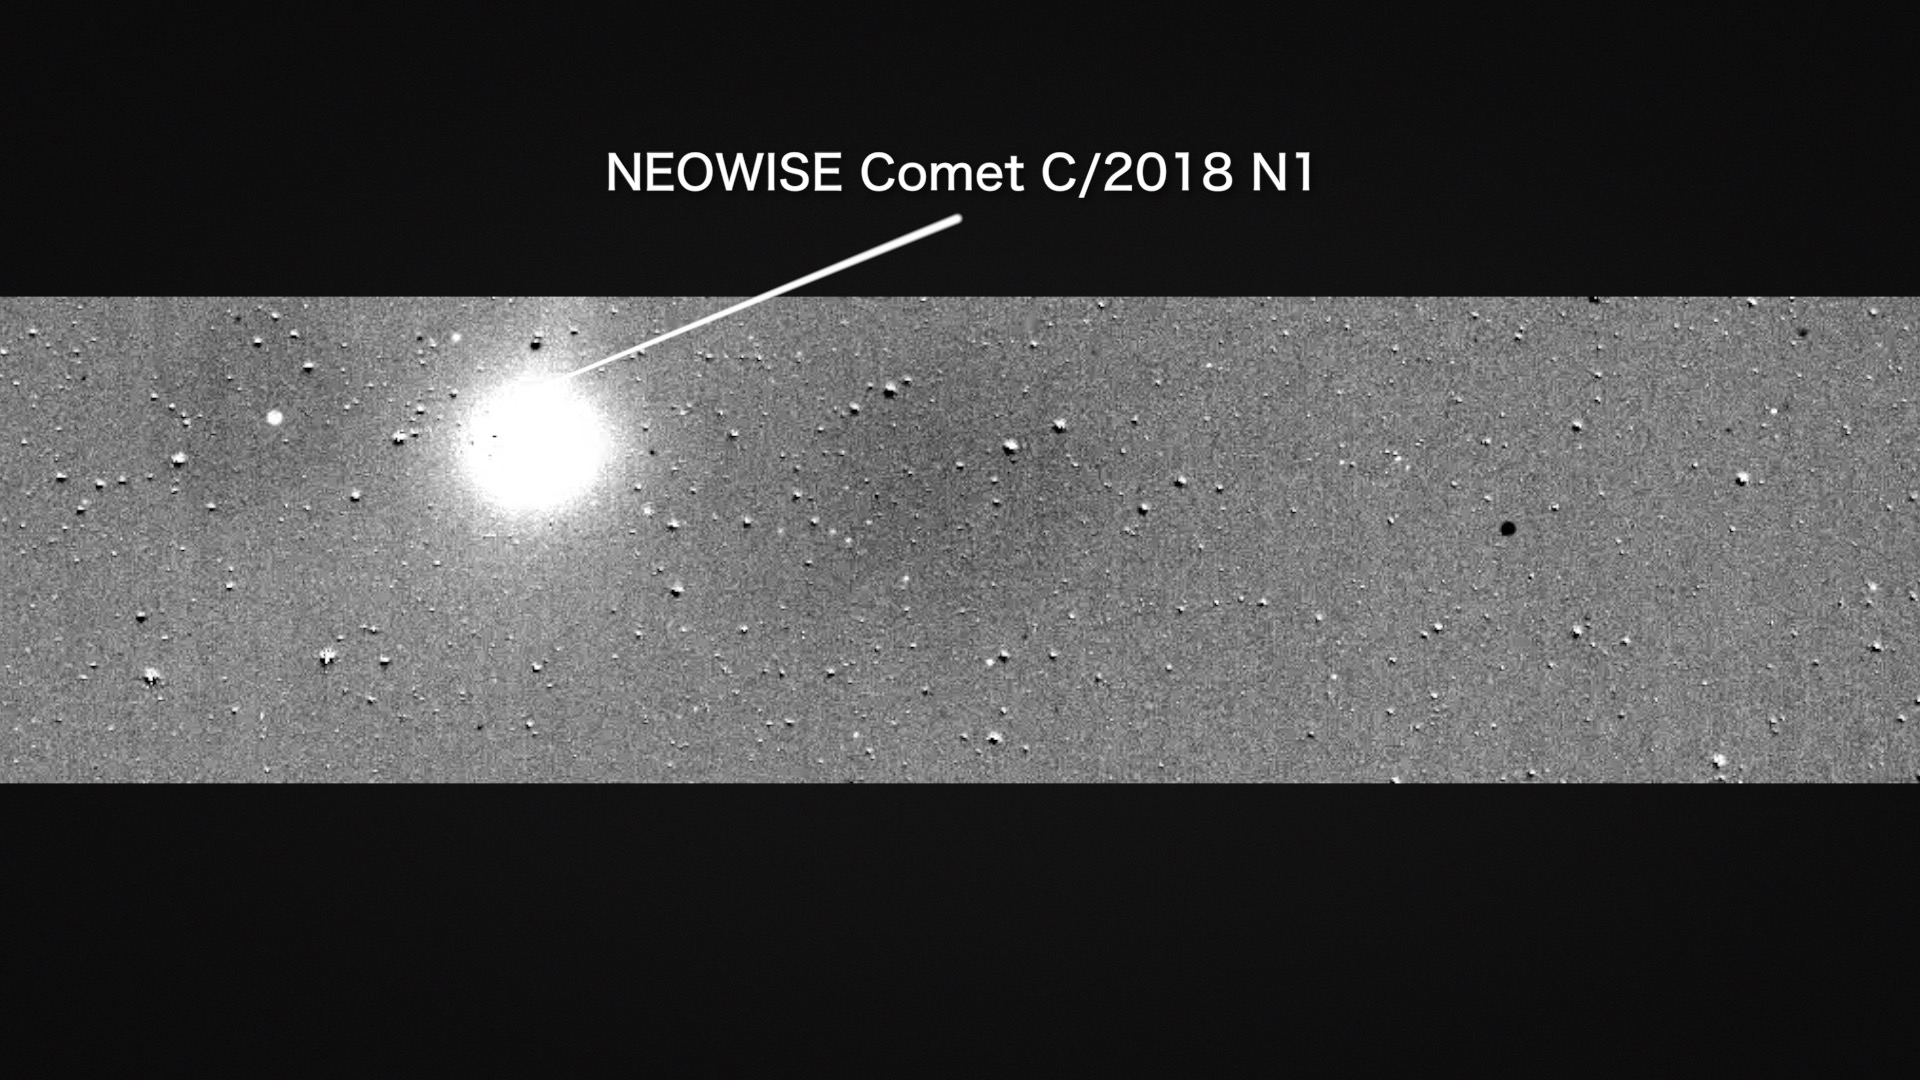 This video is compiled from a series of images taken on July 25 by the Transiting Exoplanet Survey Satellite. The angular extent of the widest field of view is six degrees. Visible in the images are the comet C/2018 N1, asteroids, variable stars, asteroids and reflected light from Mars. TESS is expected to find thousands of planets around other nearby stars. Credit: Massachusetts Institute of Technology/NASA’s Goddard Space Flight CenterWatch this video on the NASA Goddard YouTube channel.Complete transcript available.